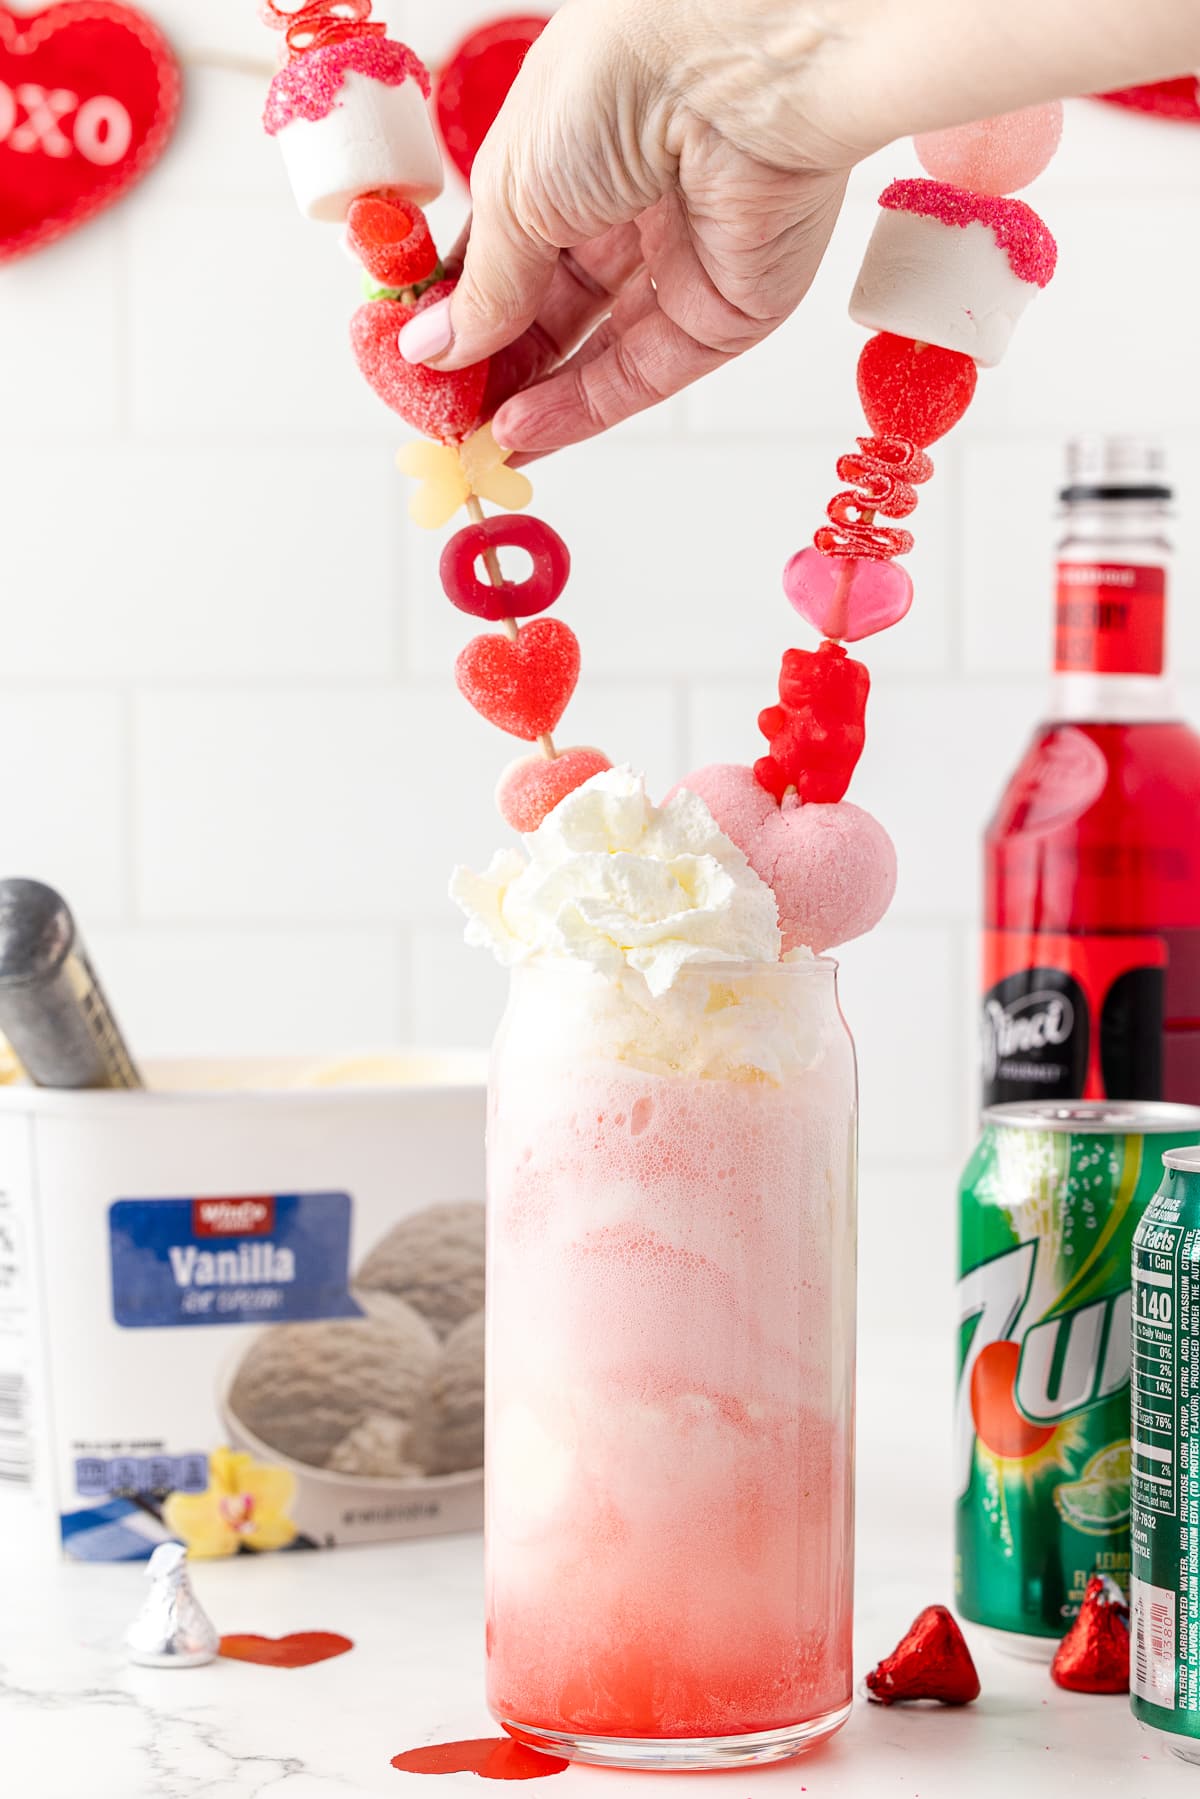 clear glass with one scoop of ice cream on a white counter with vanilla ice cream, canned whipping cream, strawberry syrup, and a bottle of 7-up on a white counter with two candy kabobs